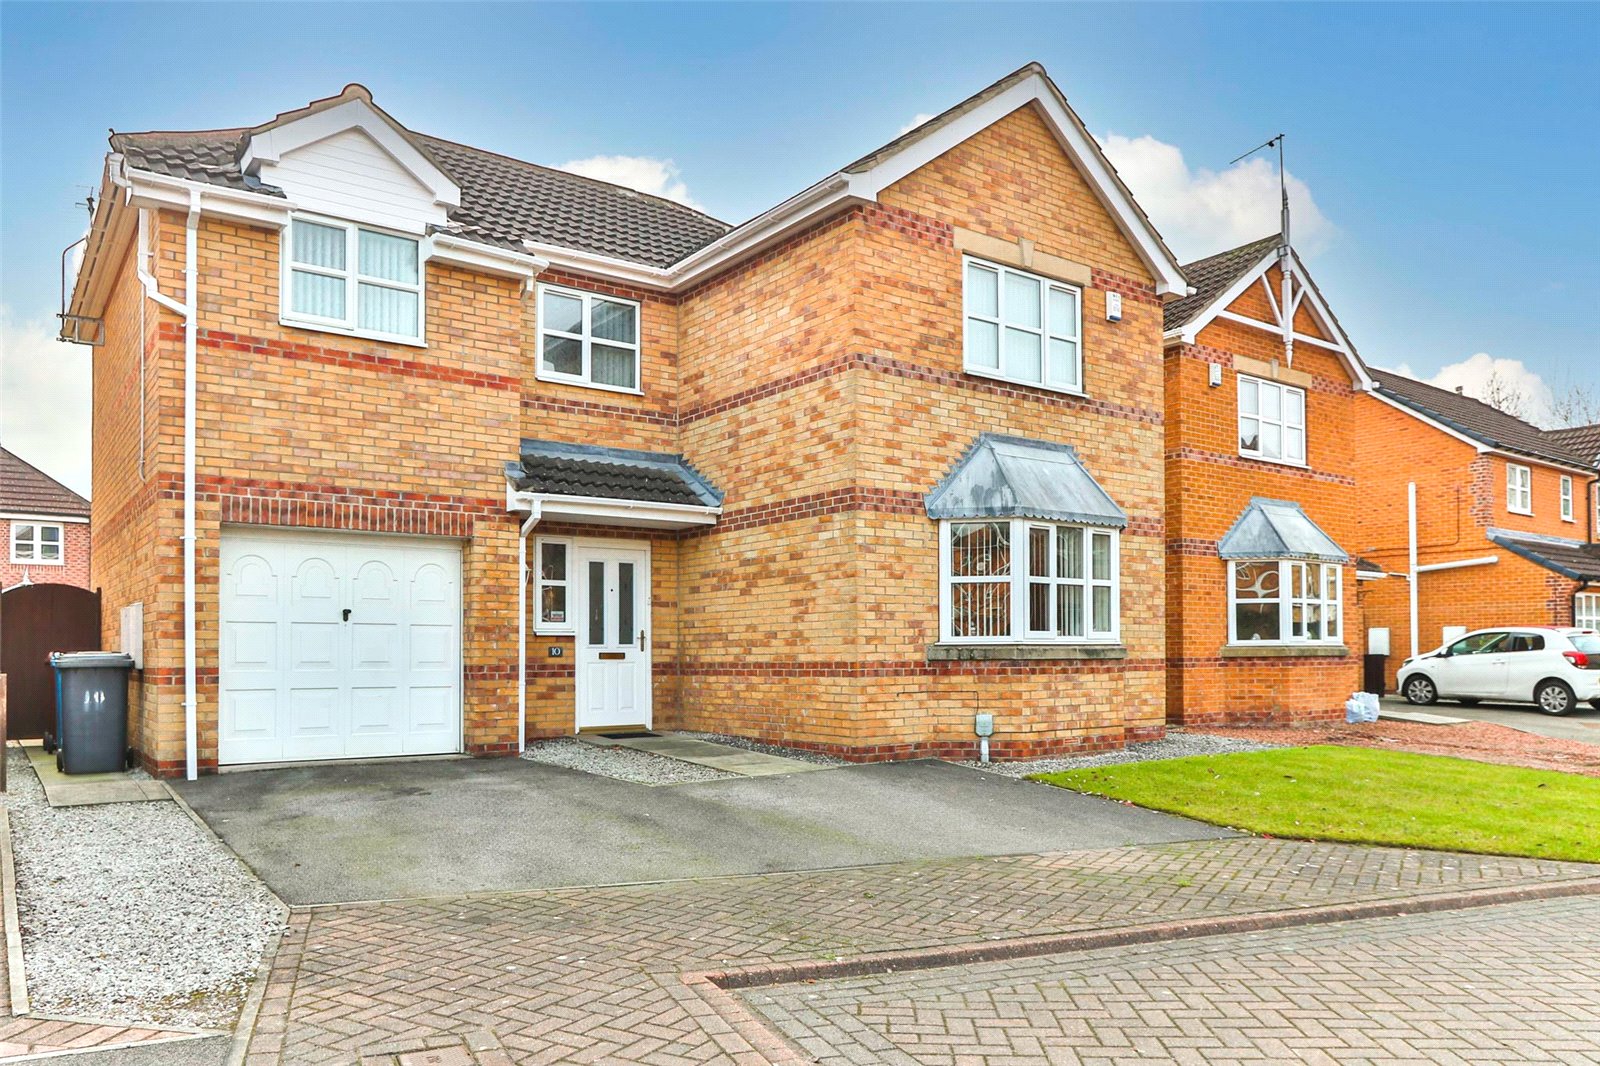 4 bed house for sale in Knightley Way, Kingswood 0